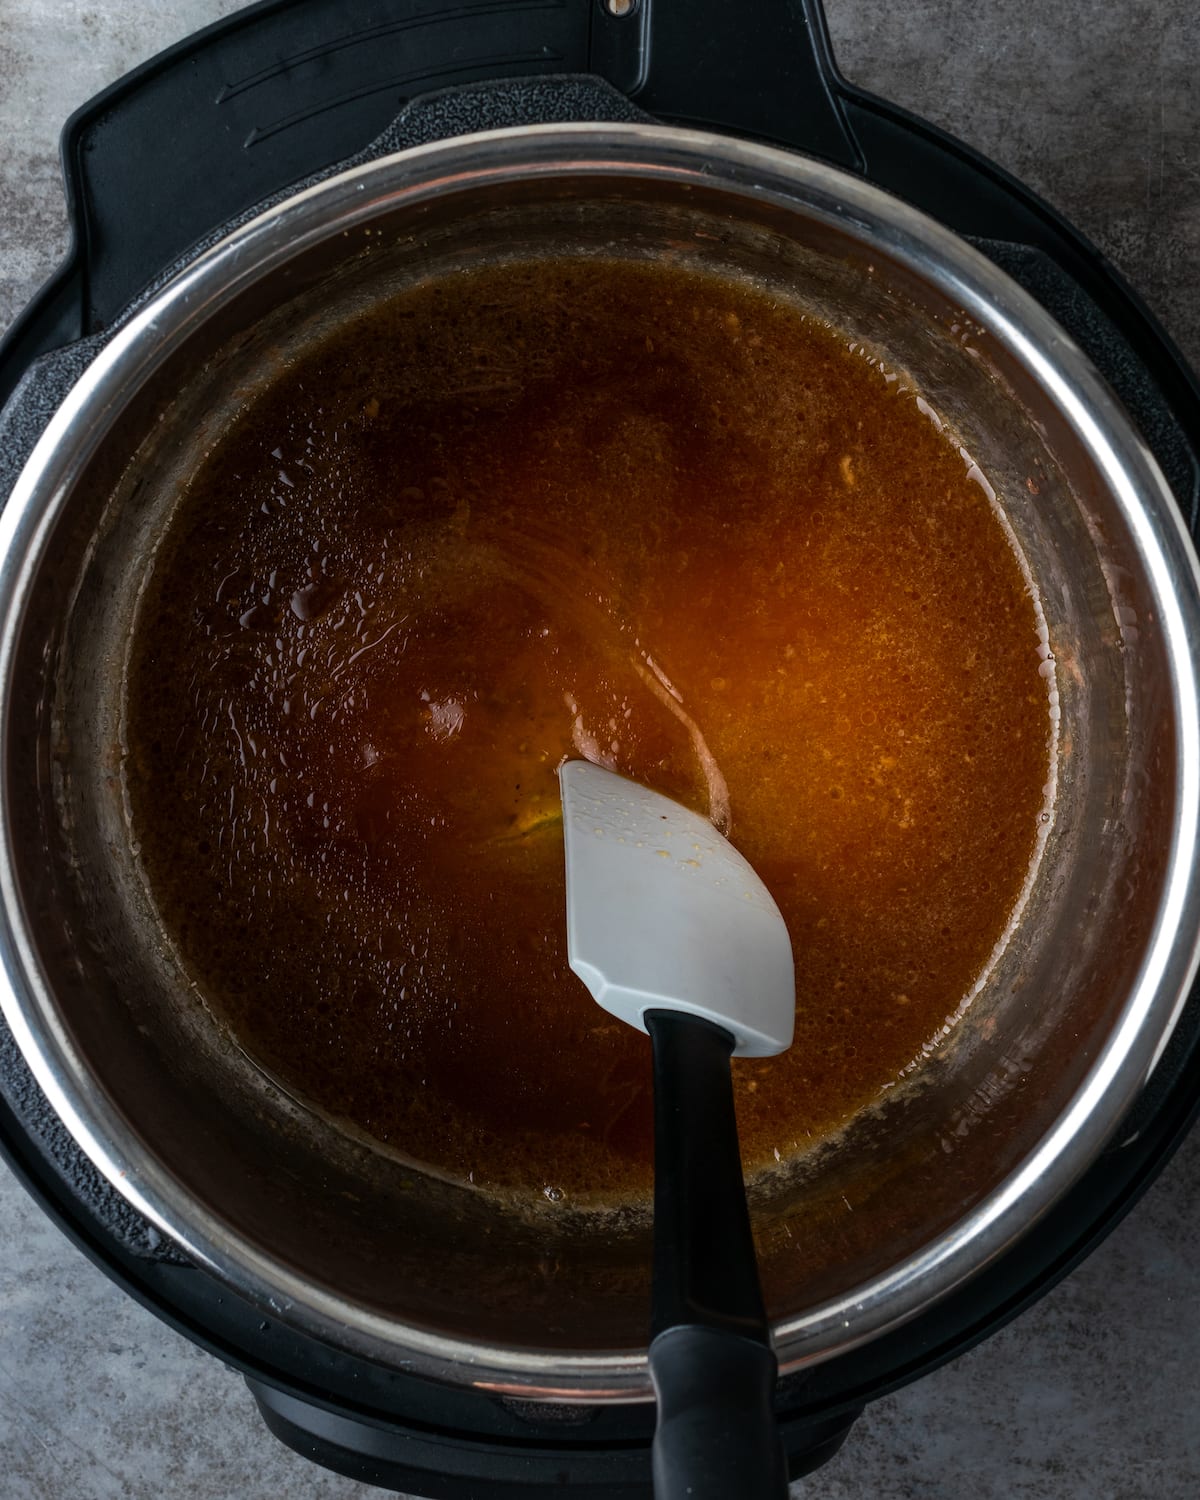 A spatula is used to stir beef broth in the bottom of the Instant Pot.